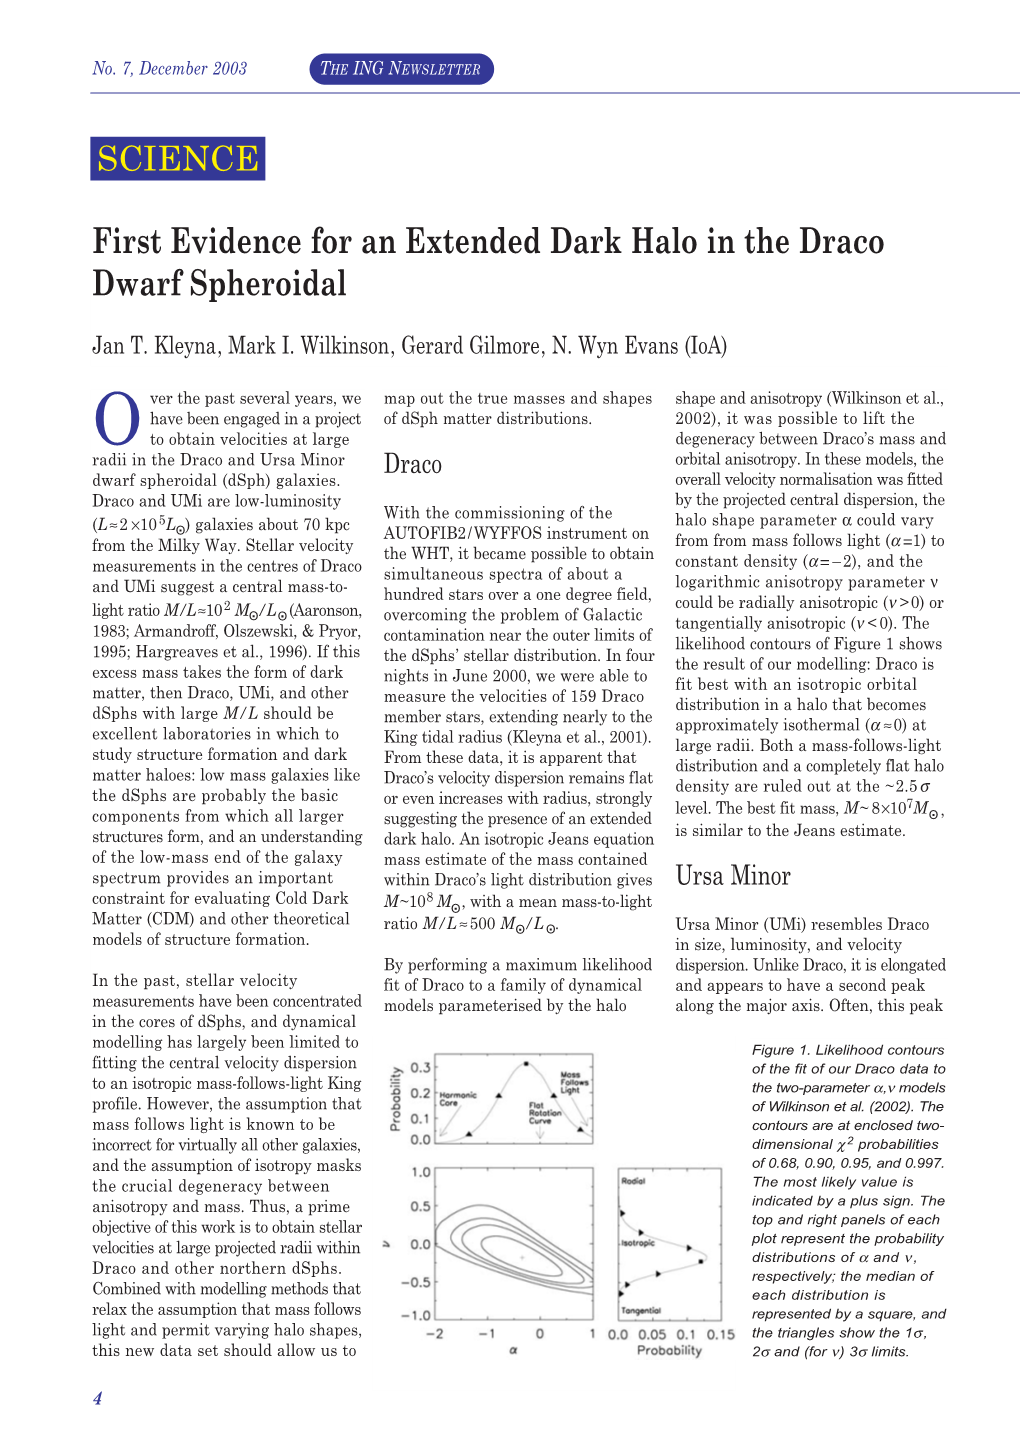 First Evidence for an Extended Dark Halo in the Draco Dwarf Spheroidal